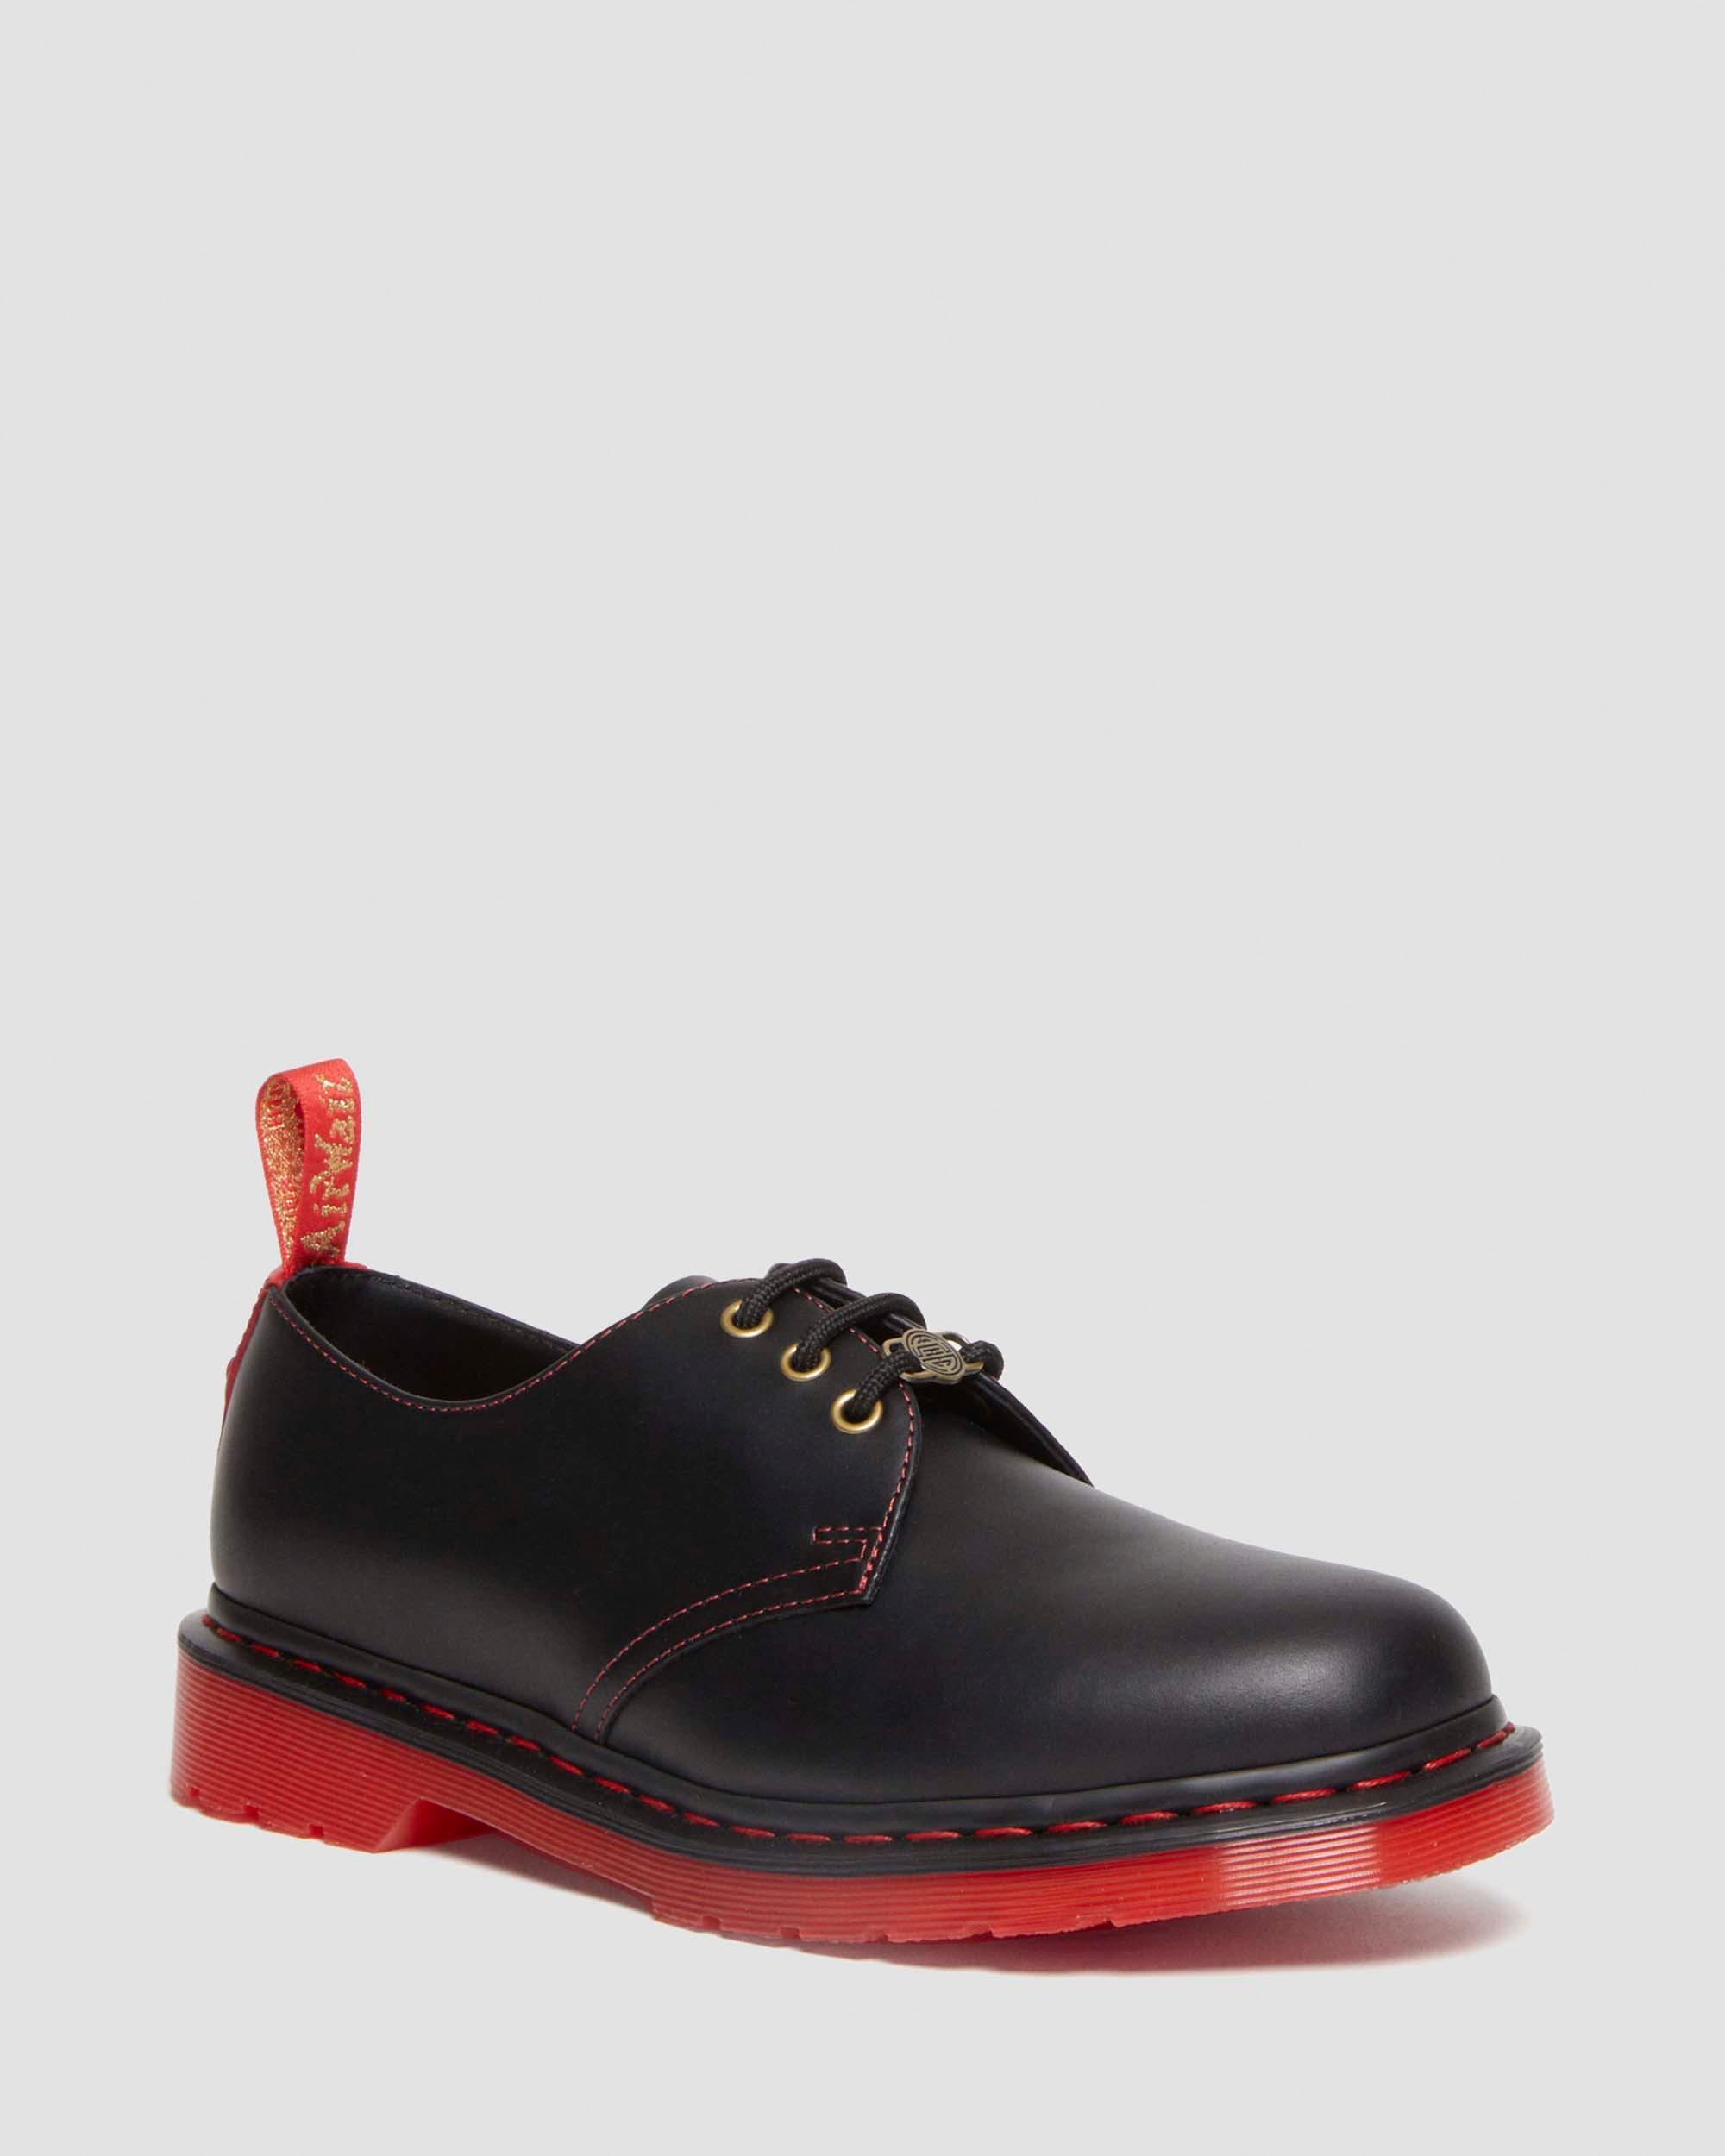 Dr. Martens 1461 Year Of The Rabbit Leather Oxford Shoes in Red | Lyst